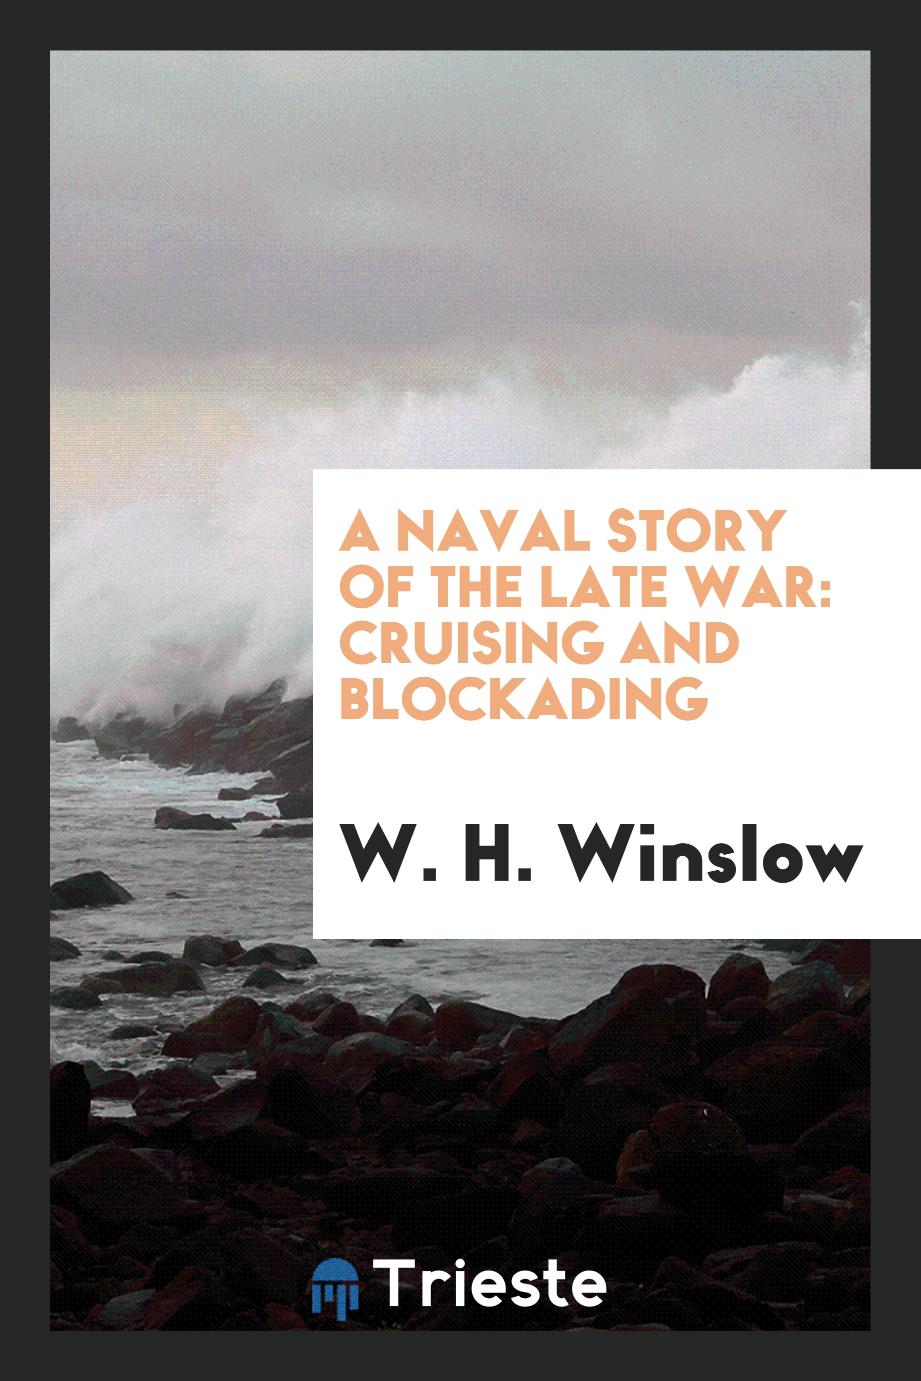 A Naval Story of the Late War: Cruising and Blockading